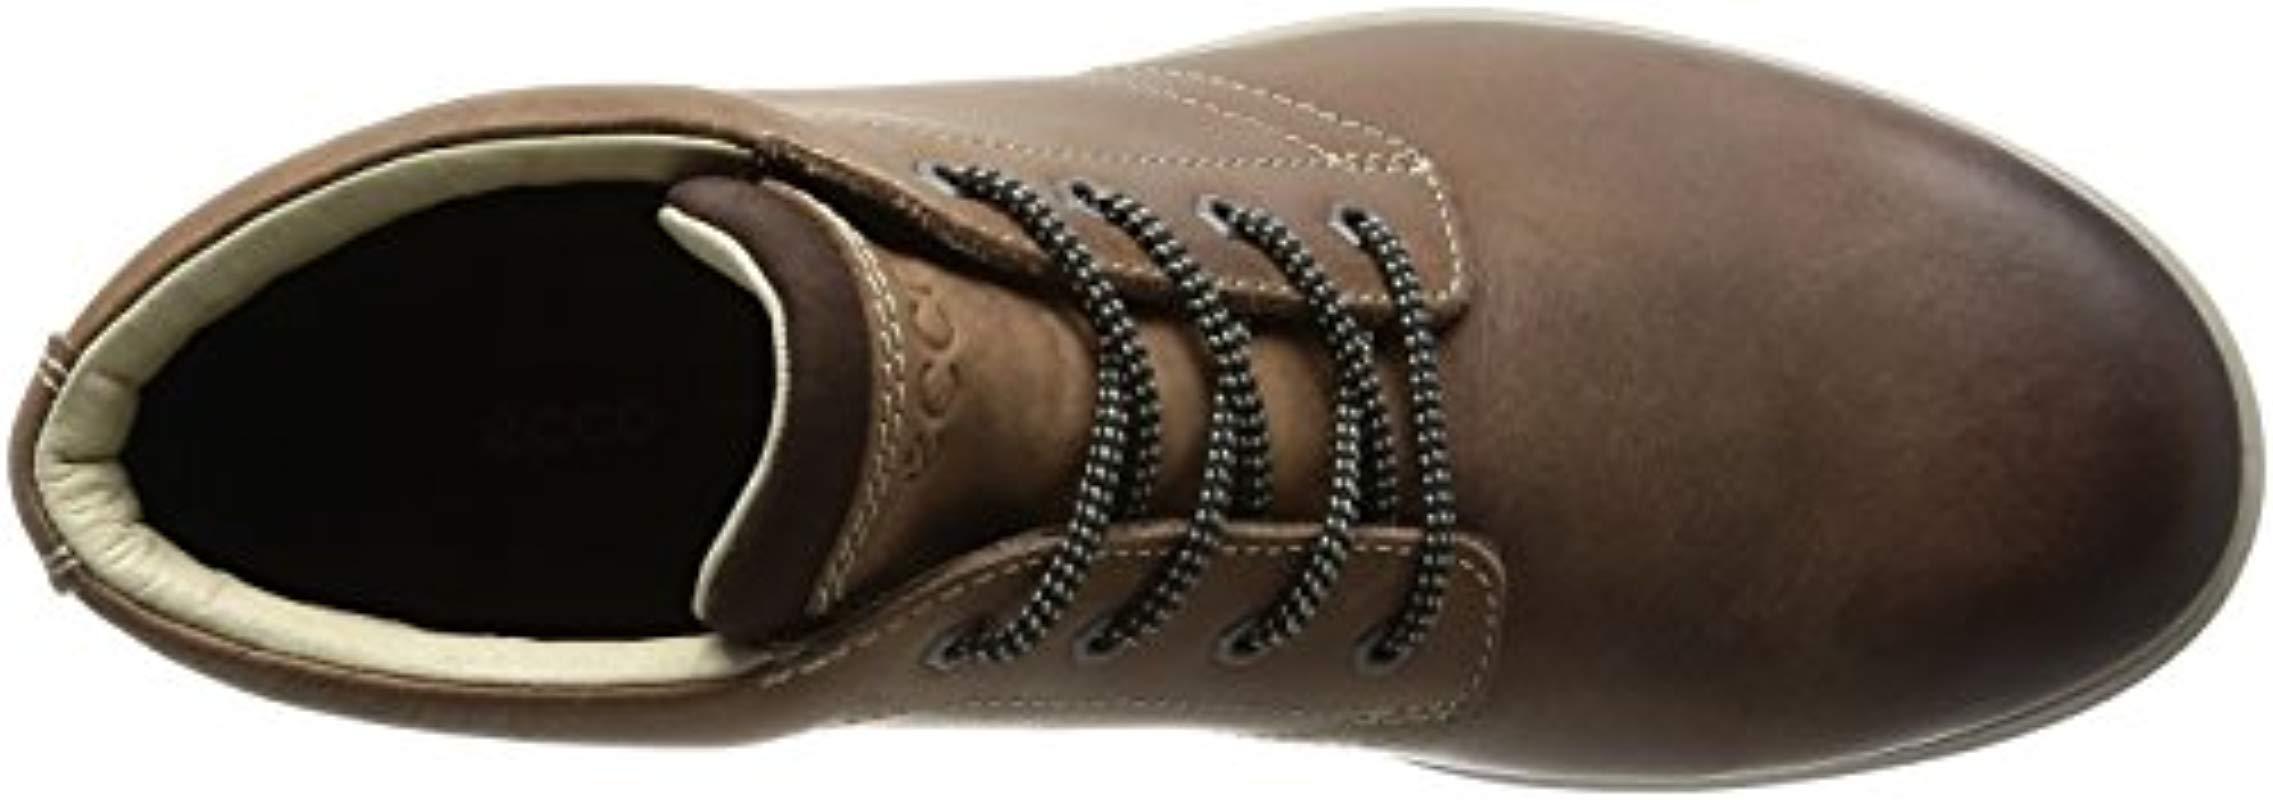 Ecco Leather Whistler Gtx Mid Boot in Cocoa Brown (Brown) for Men - Lyst